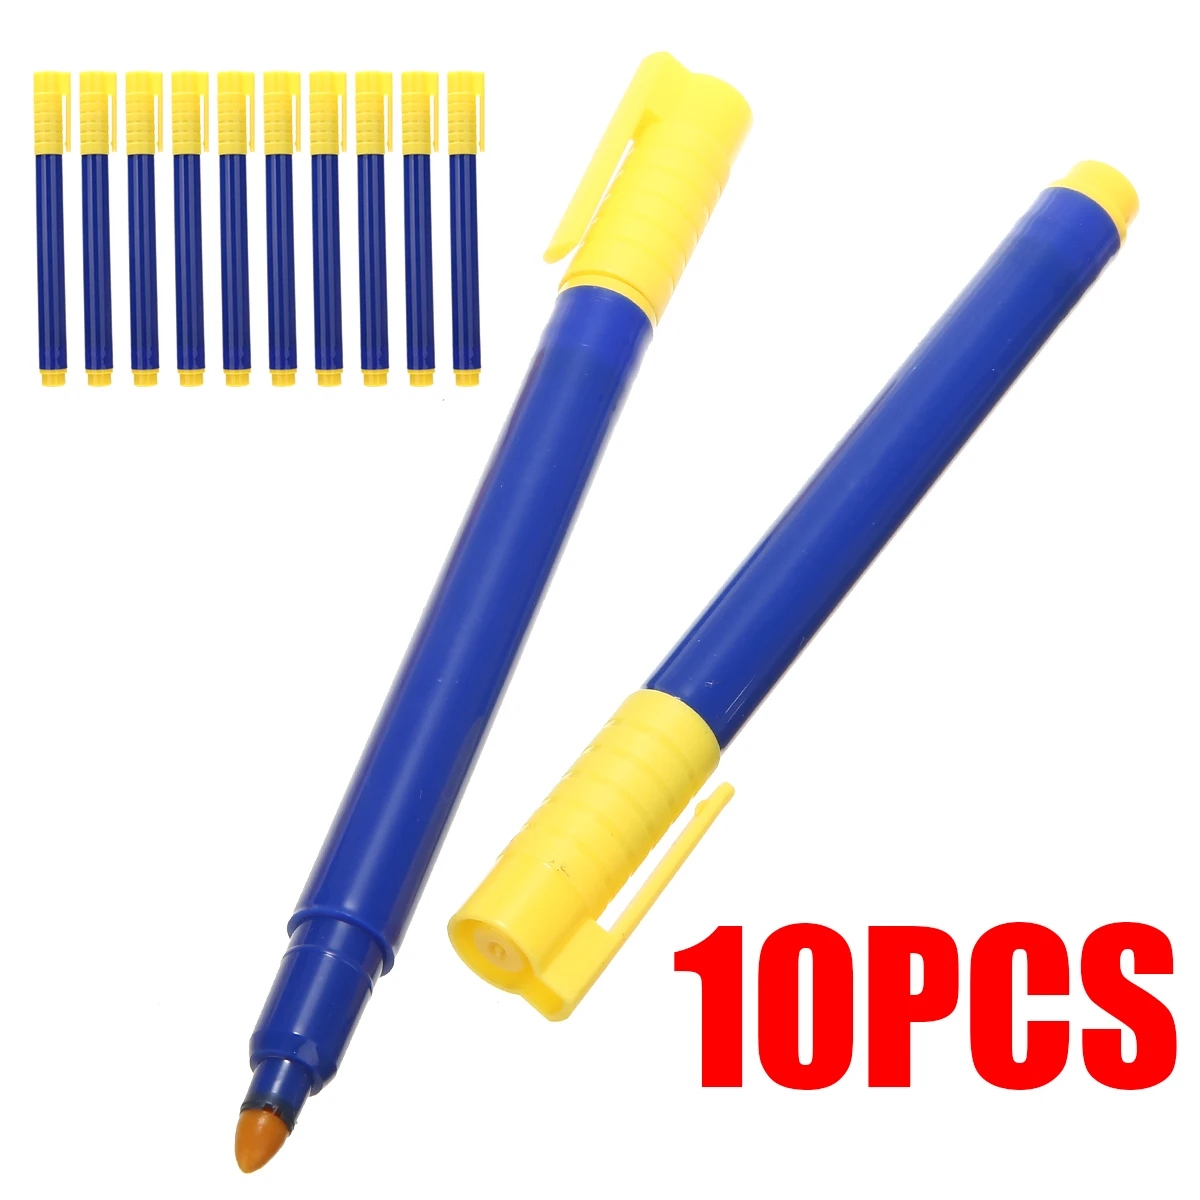 10pcs/set Practical Bank Note Checker Tester Pens Counterfeit Fake Money Detector Marker Currency Detector